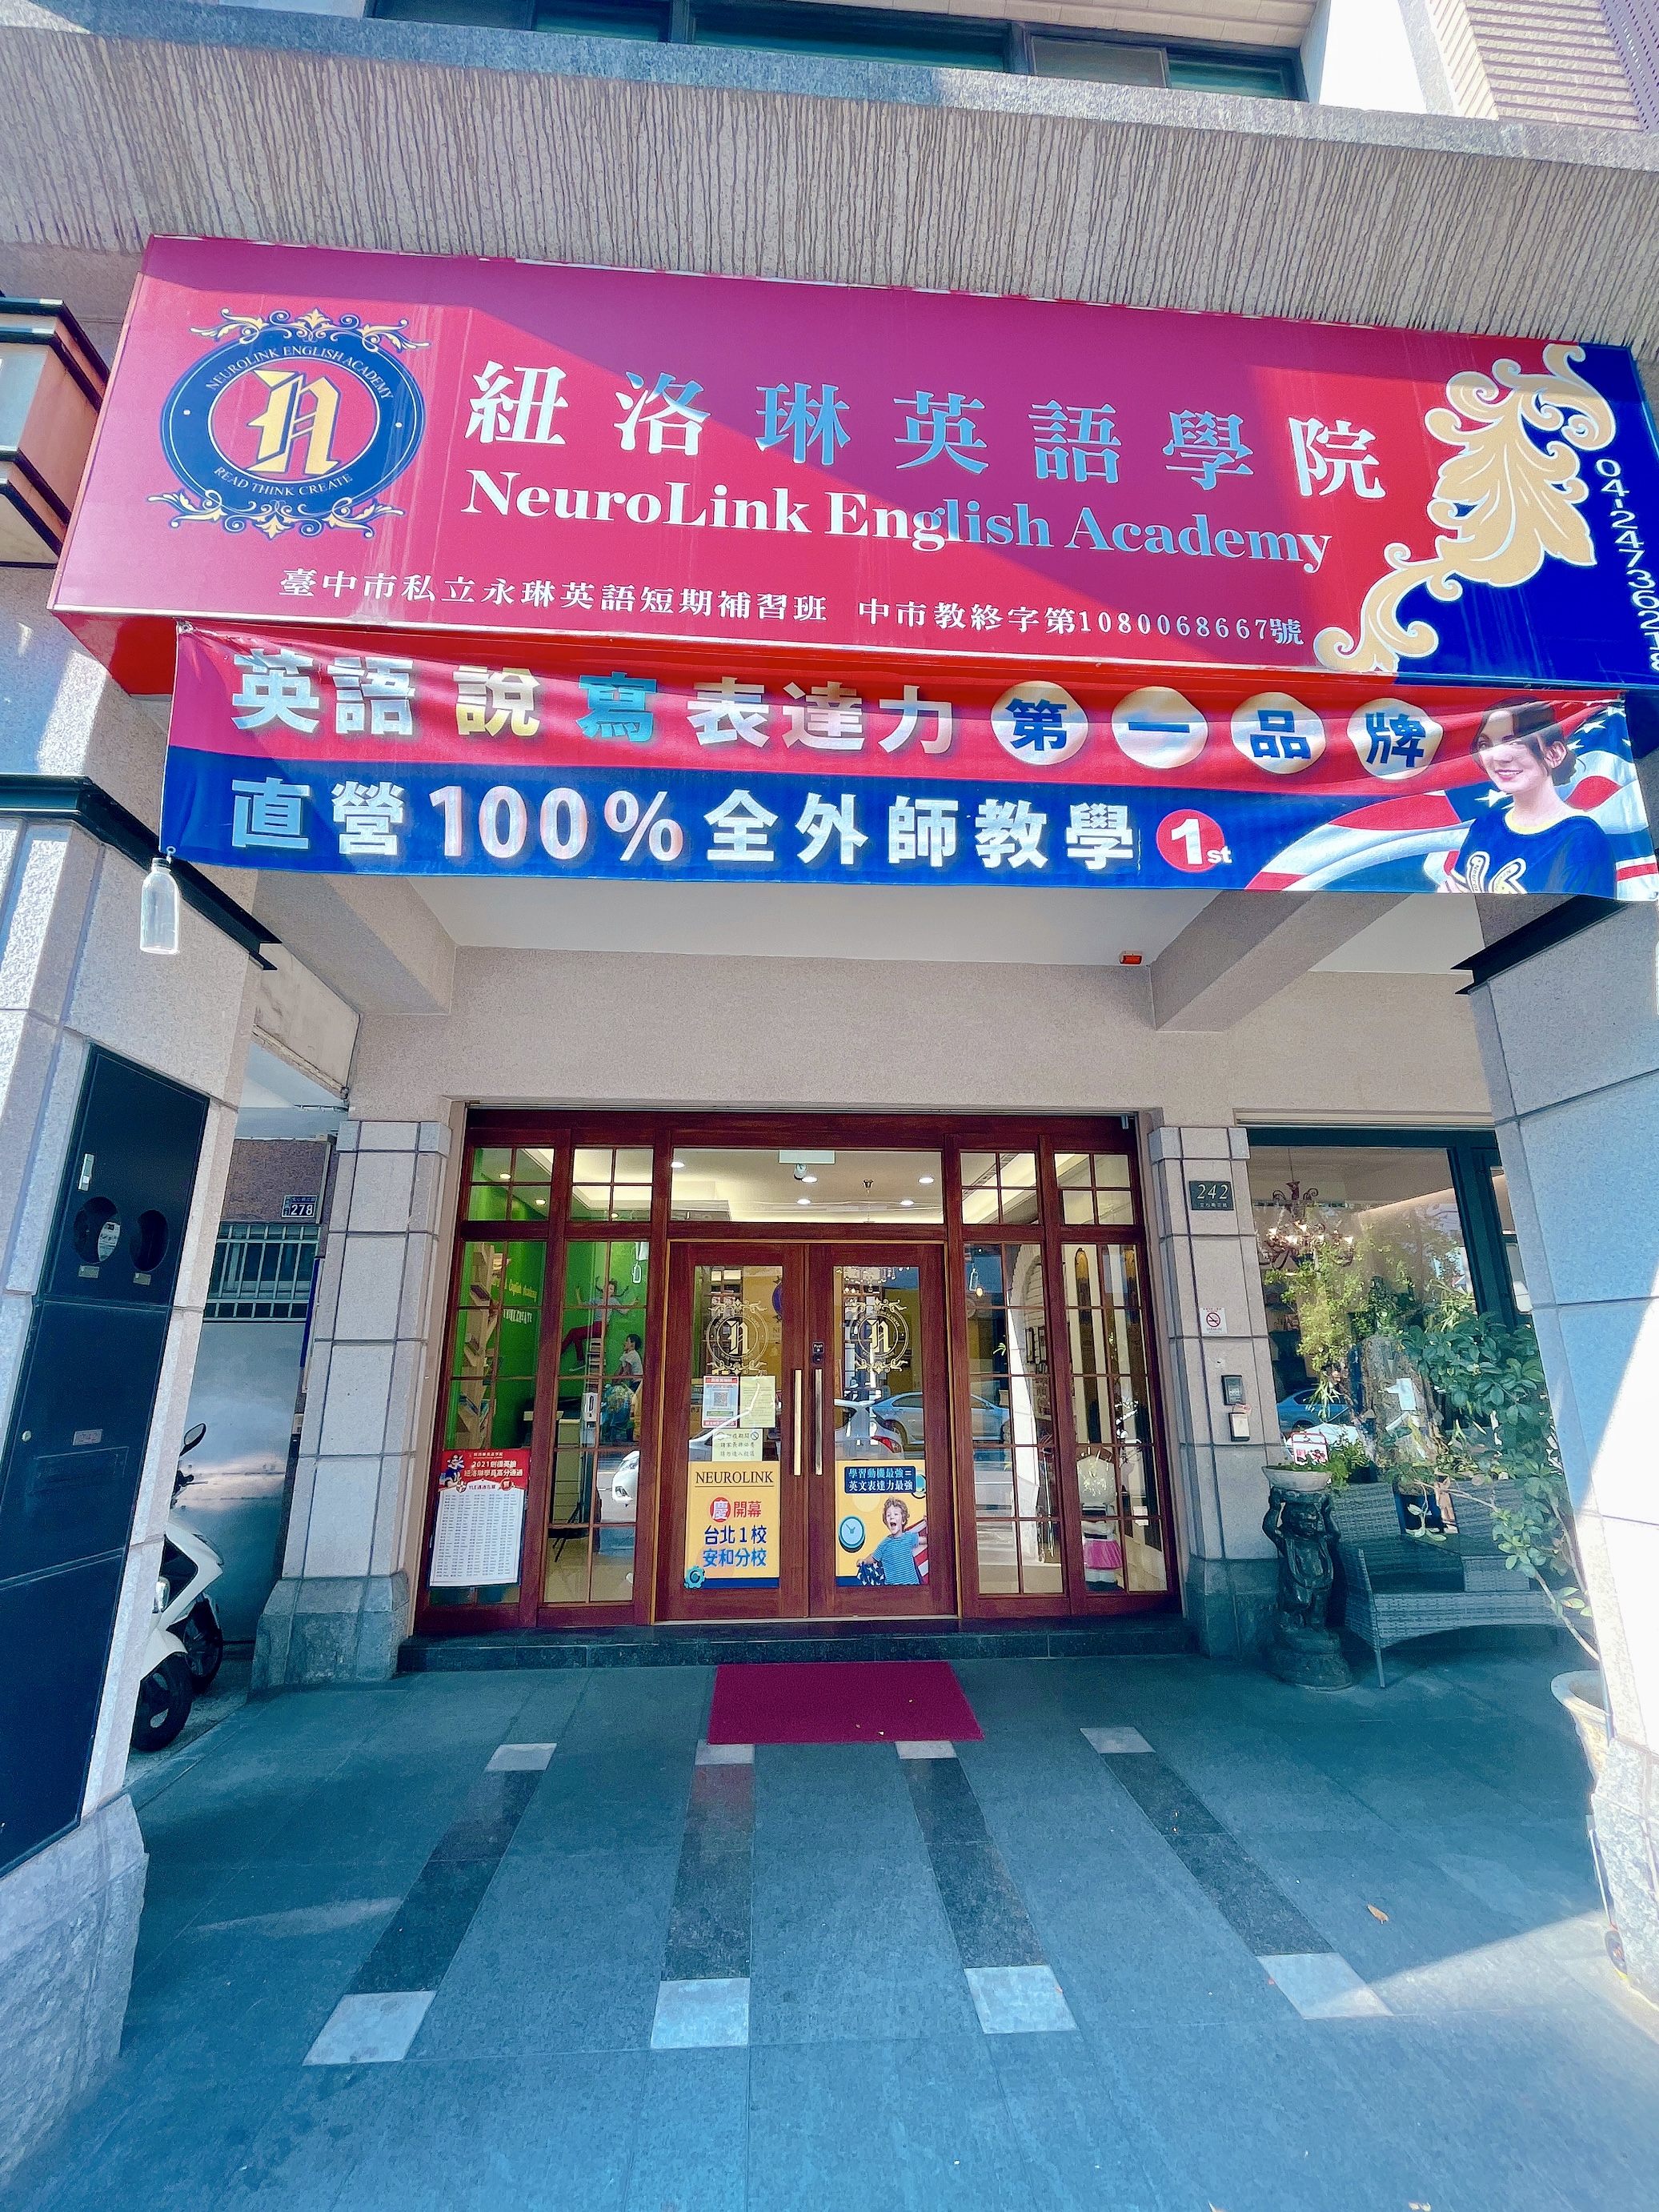 Teaching English and Living in Taiwan Jobs Available 教學工作, Neurolink English Academy STABLE Hours! GOOD Salaries! HELP Finding Housing! COMPLETE Materials! 1-Year CONTRACTS! image